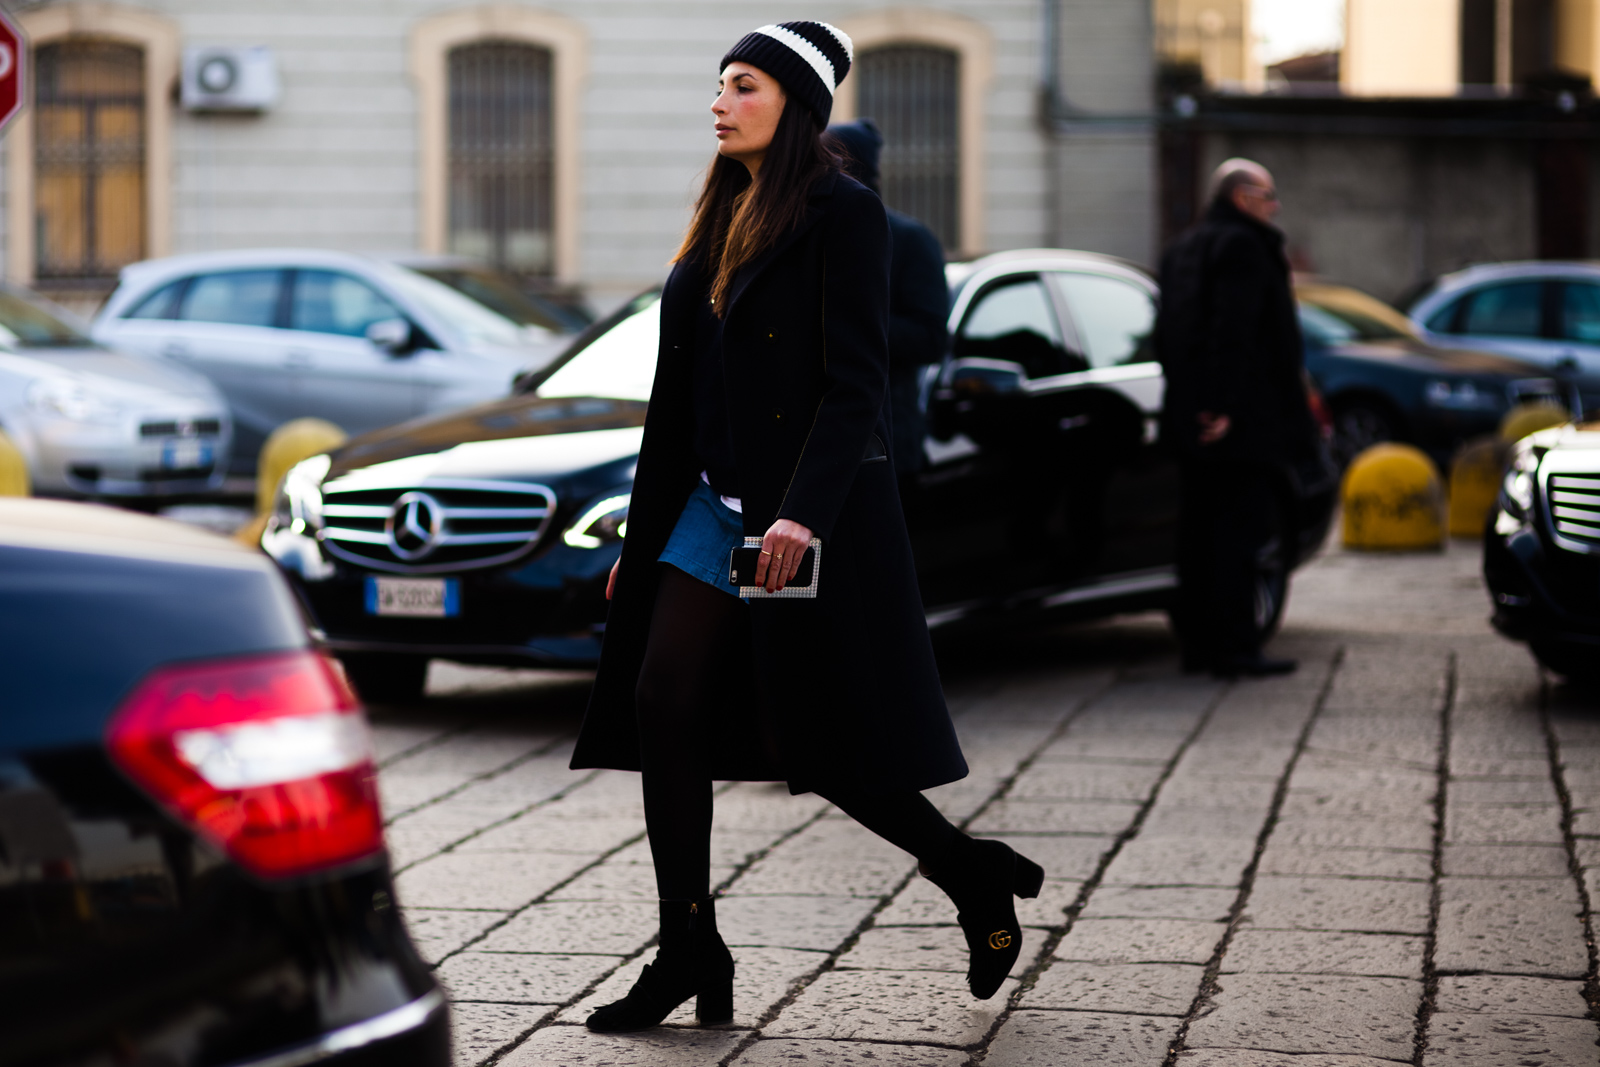 Laetitia Paul wearing a navy coat and black Gucci ankle boots before the Gucci Men's fashion show in Milan, Italy